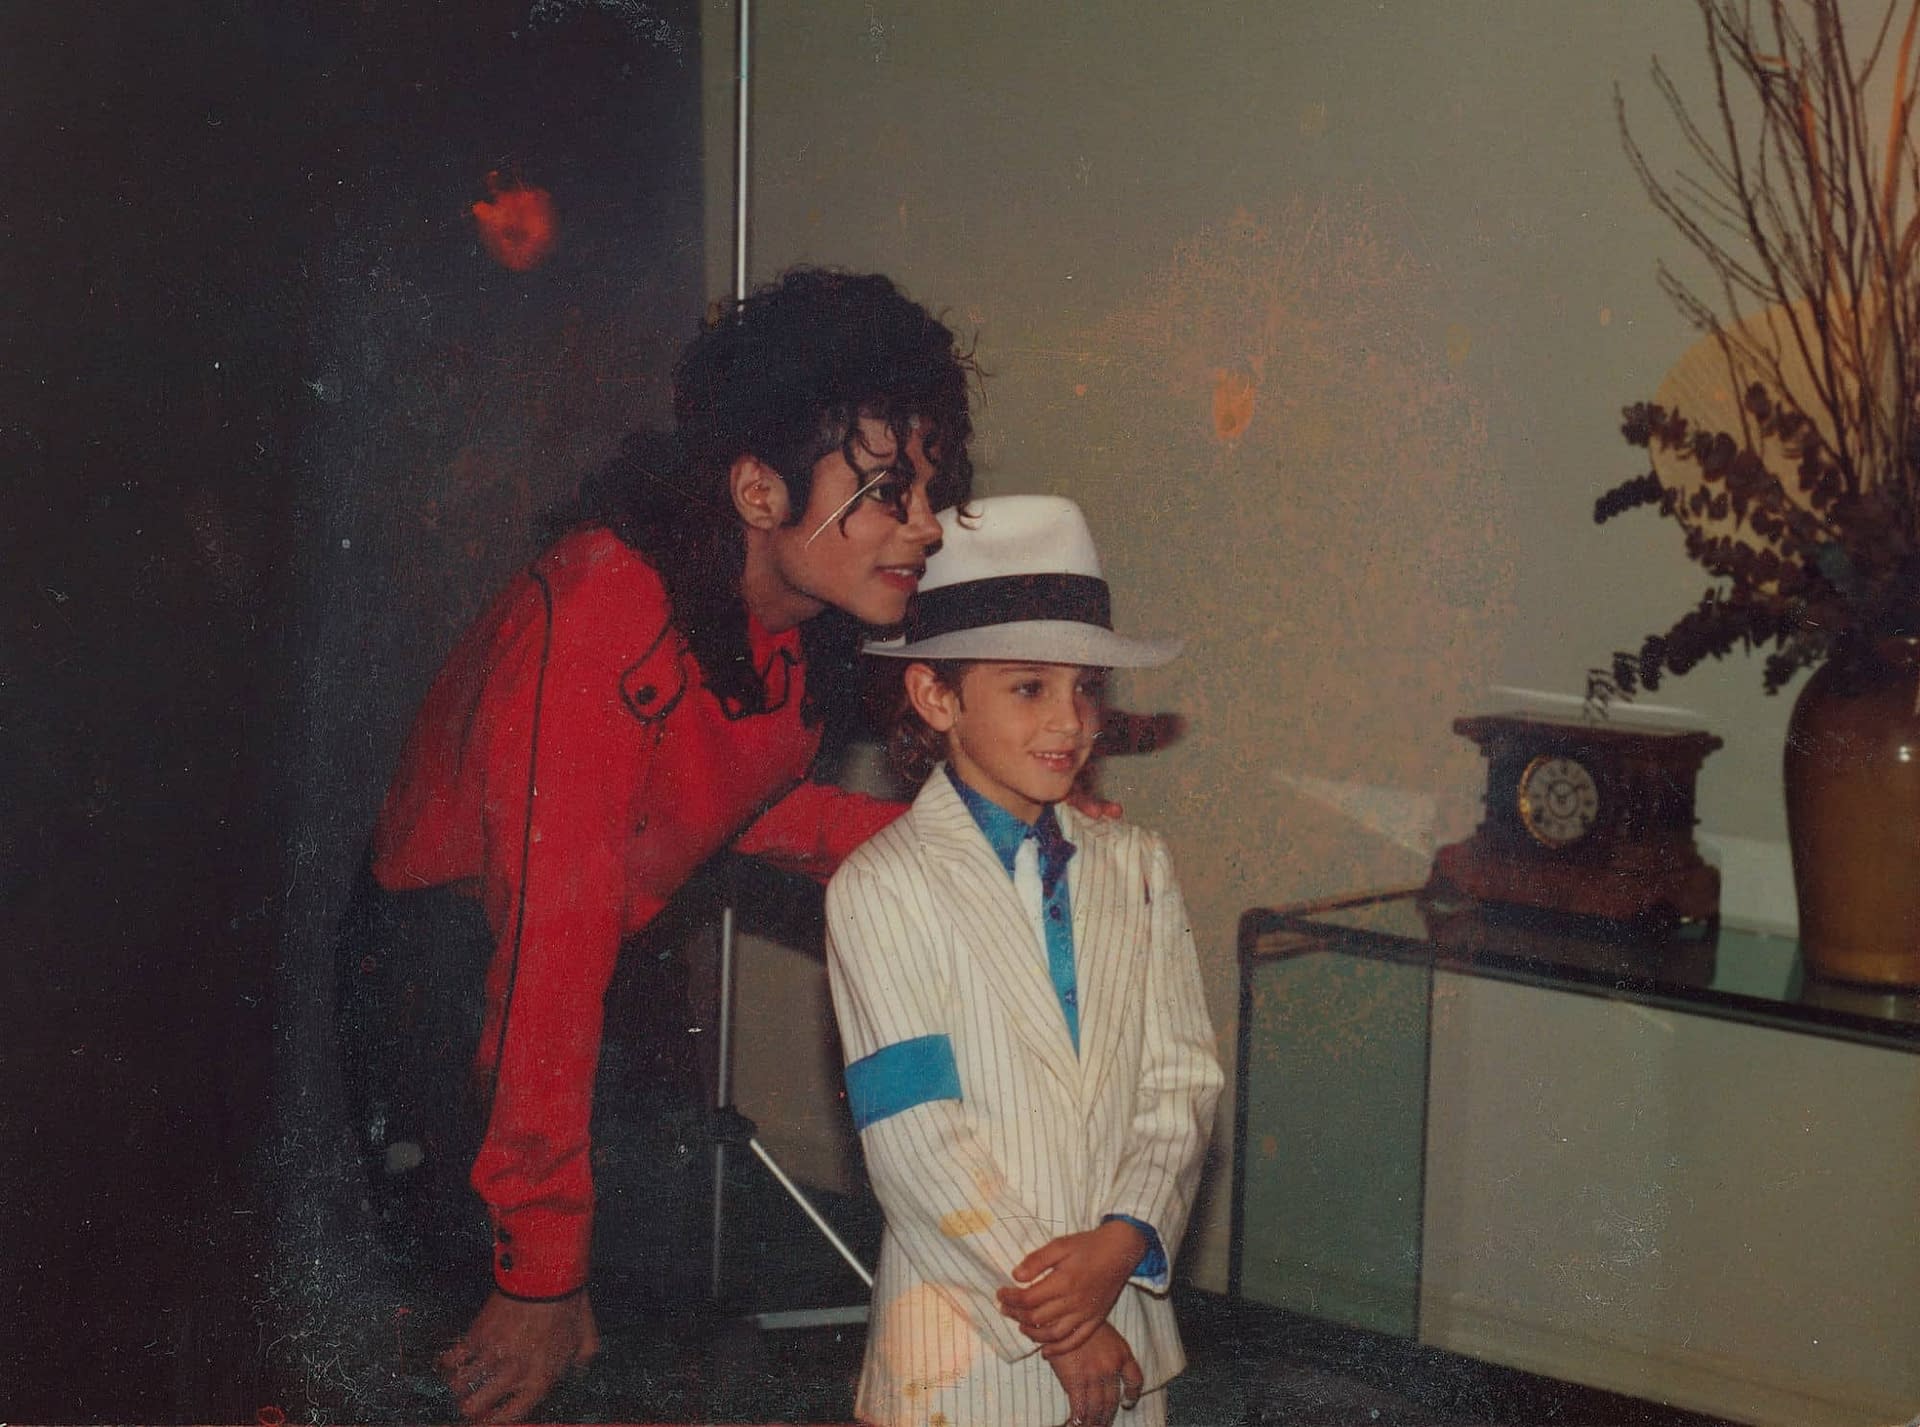 First Trailer for the Michael Jackson Documentary Leaving Neverland, Director Talks Follow-Up